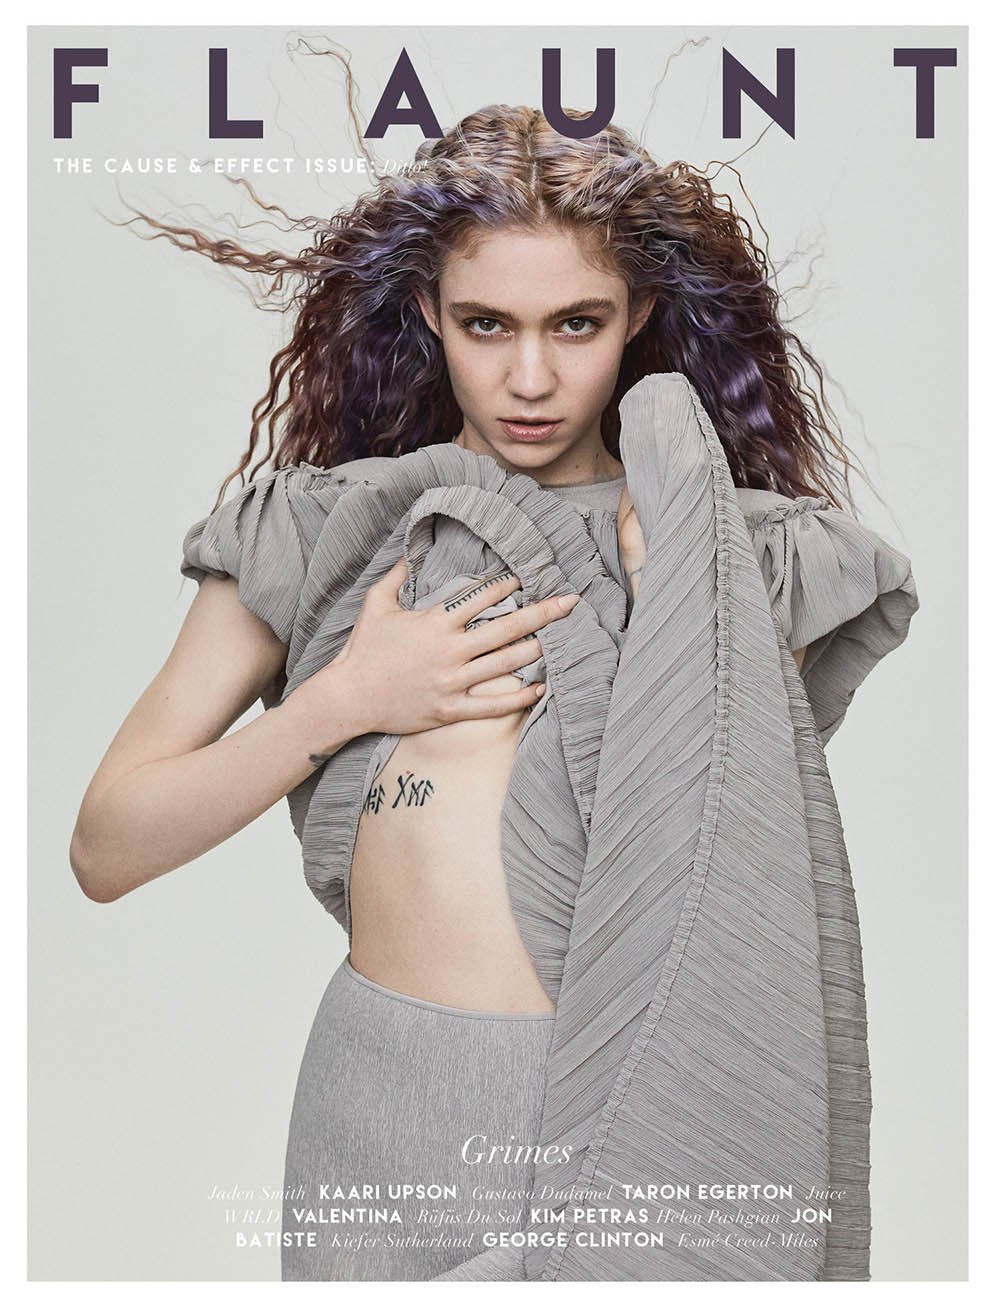 Grimes-covers-Flaunt-Magazine-Issue-165-by-Zoey-Grossman-1.jpg